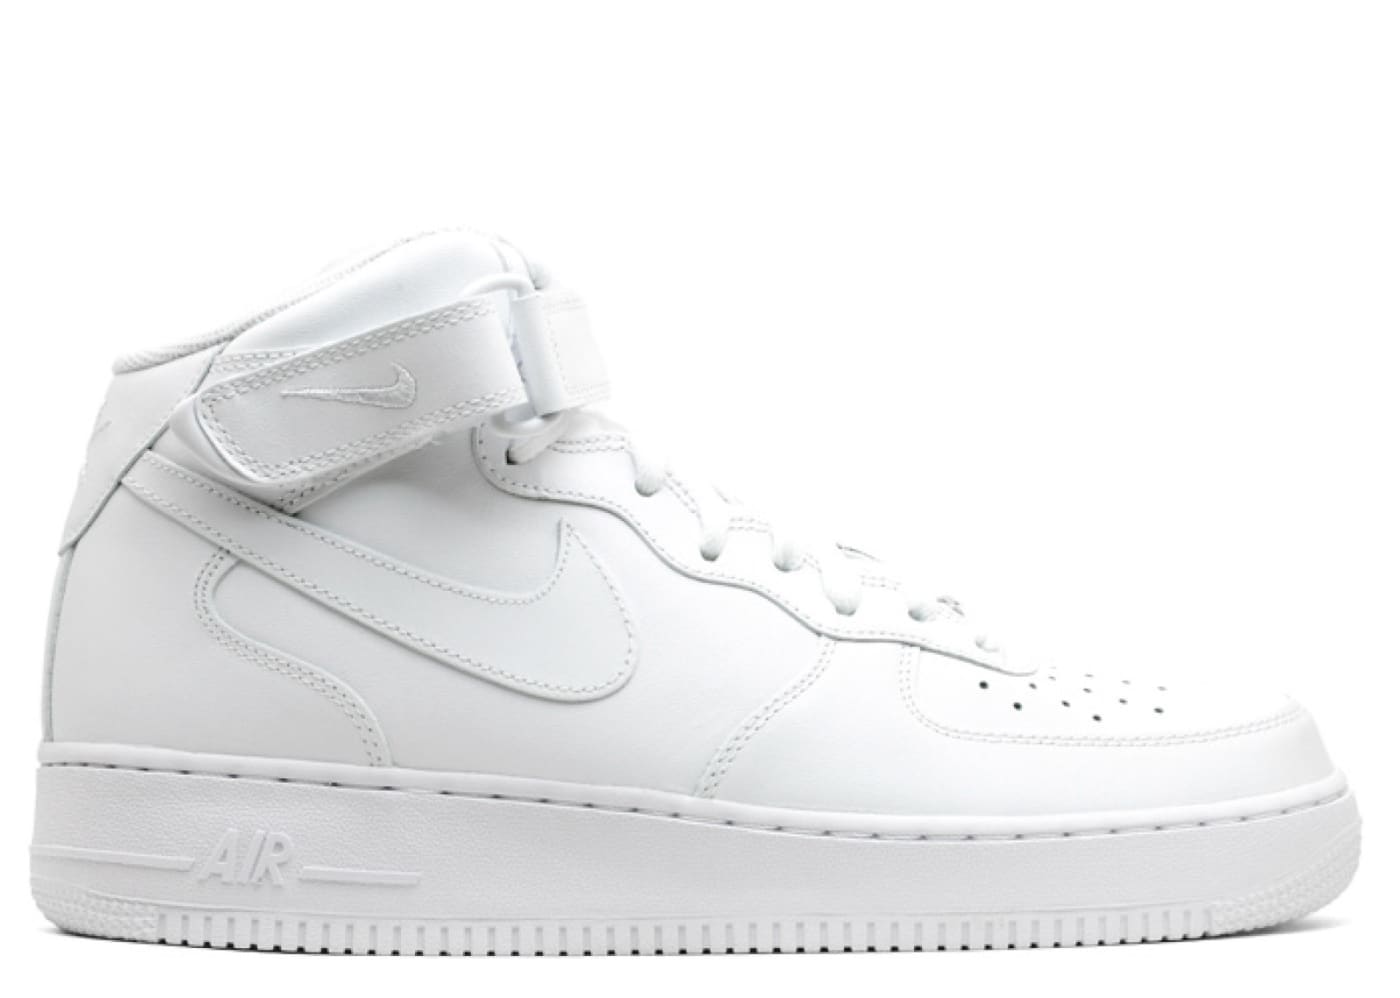 In Defense of Nike Air Force 1 Mids | Complex